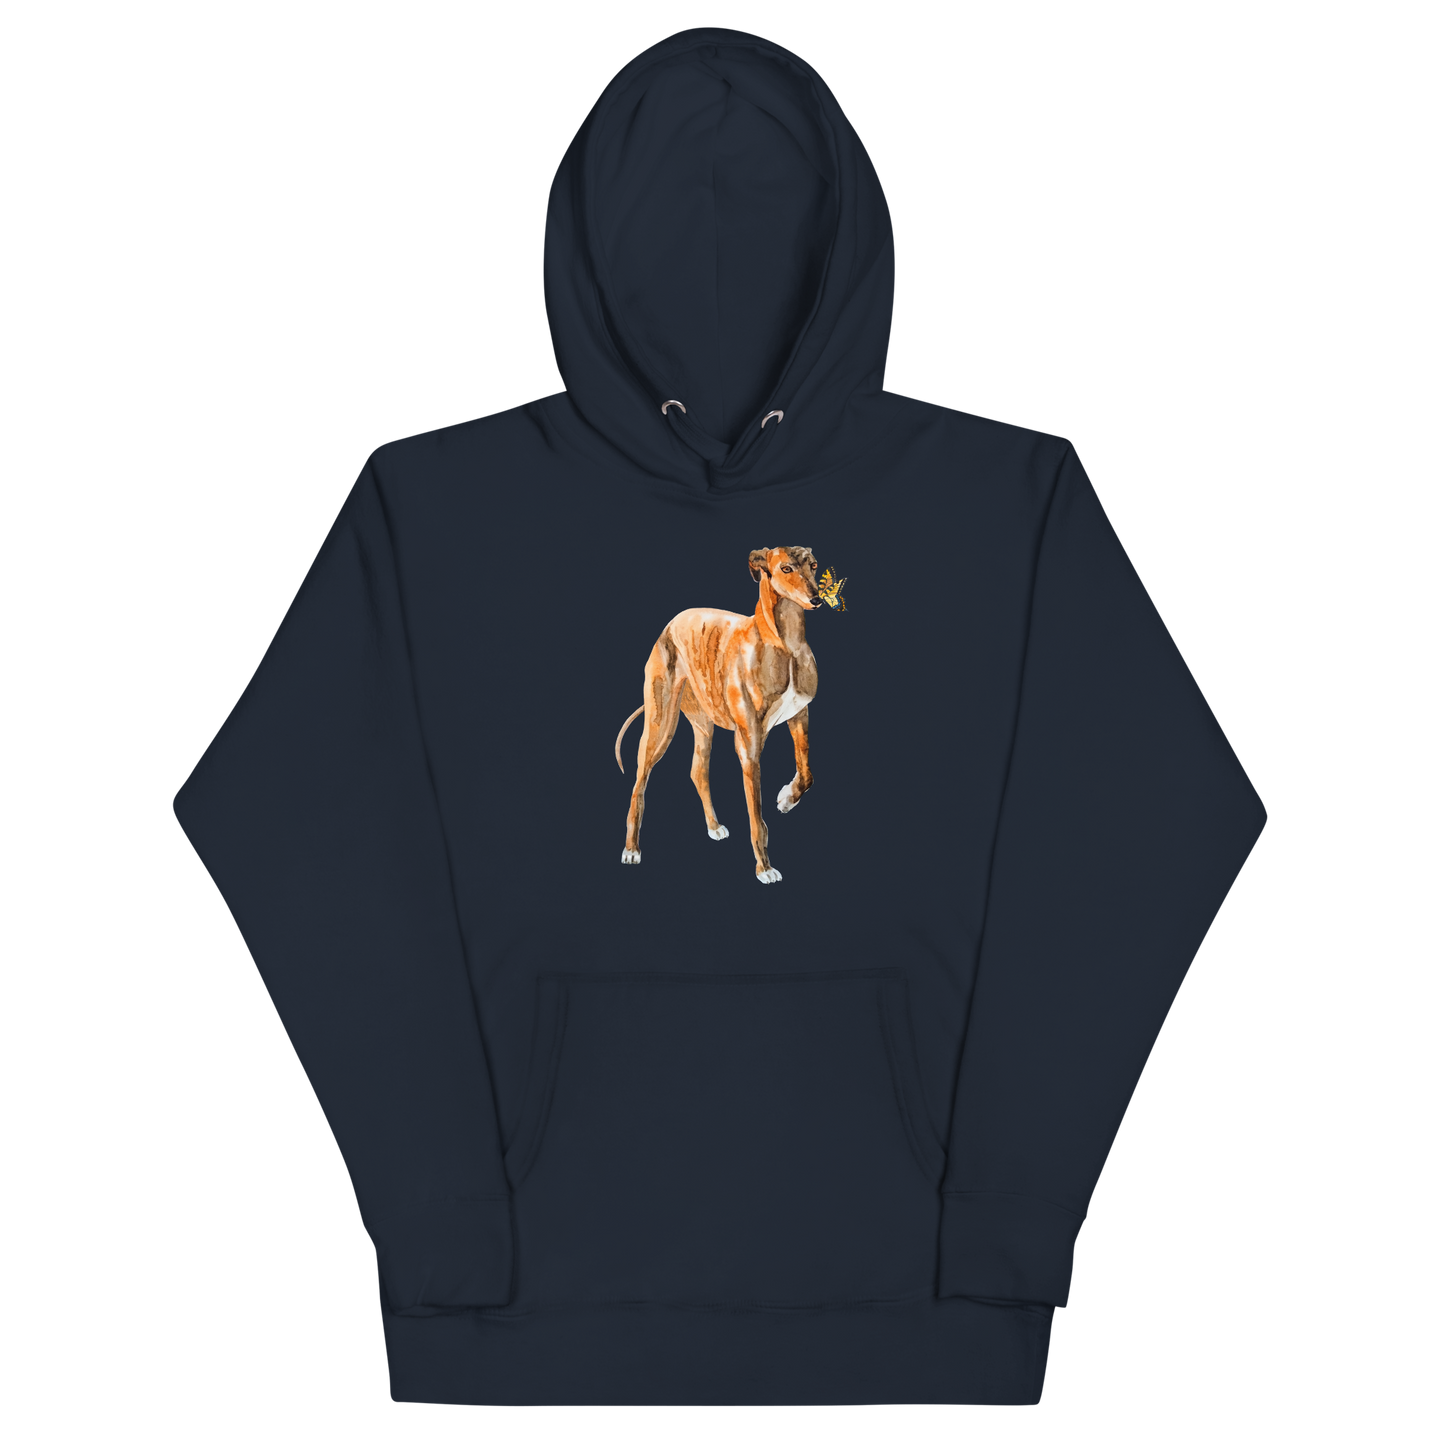 Navy Blazer Premium Greyhound Hoodie featuring an adorable Greyhound And Butterfly graphic on the chest - Cute Graphic Greyhound Hoodies - Boozy Fox